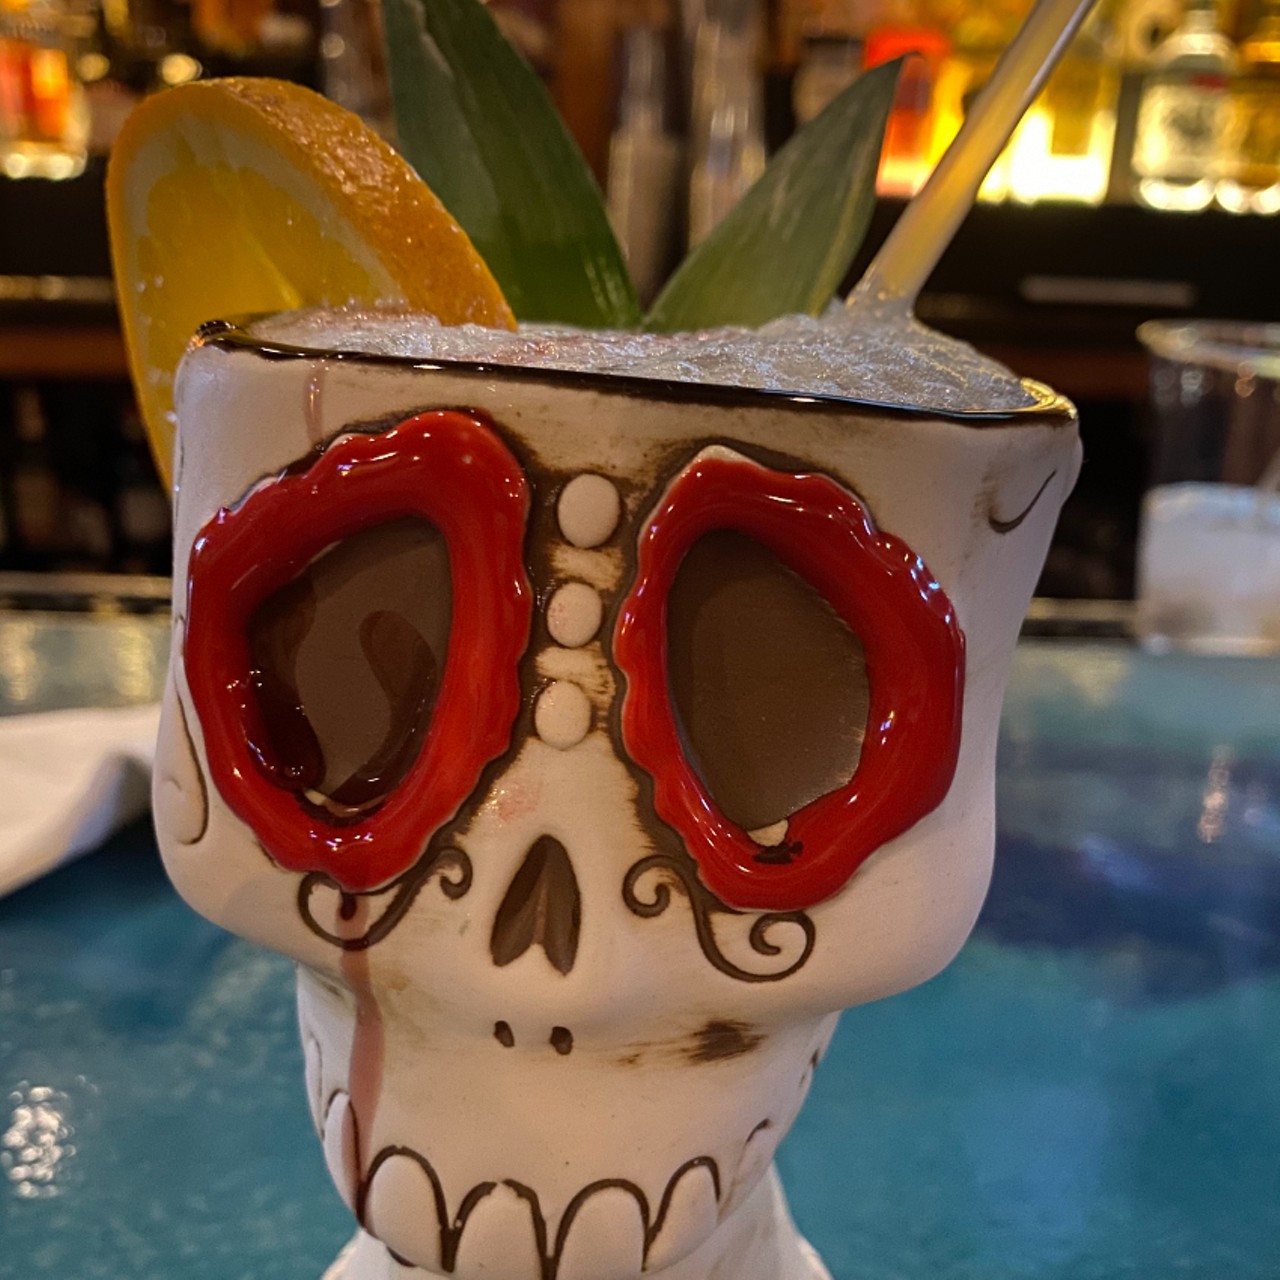 Taha&#146;a Twisted Tiki
(4199 Manchester Avenue, 314-202-8300)
Photo credit: STL Foodie Gram  / @stlfoodiegram on Instagram